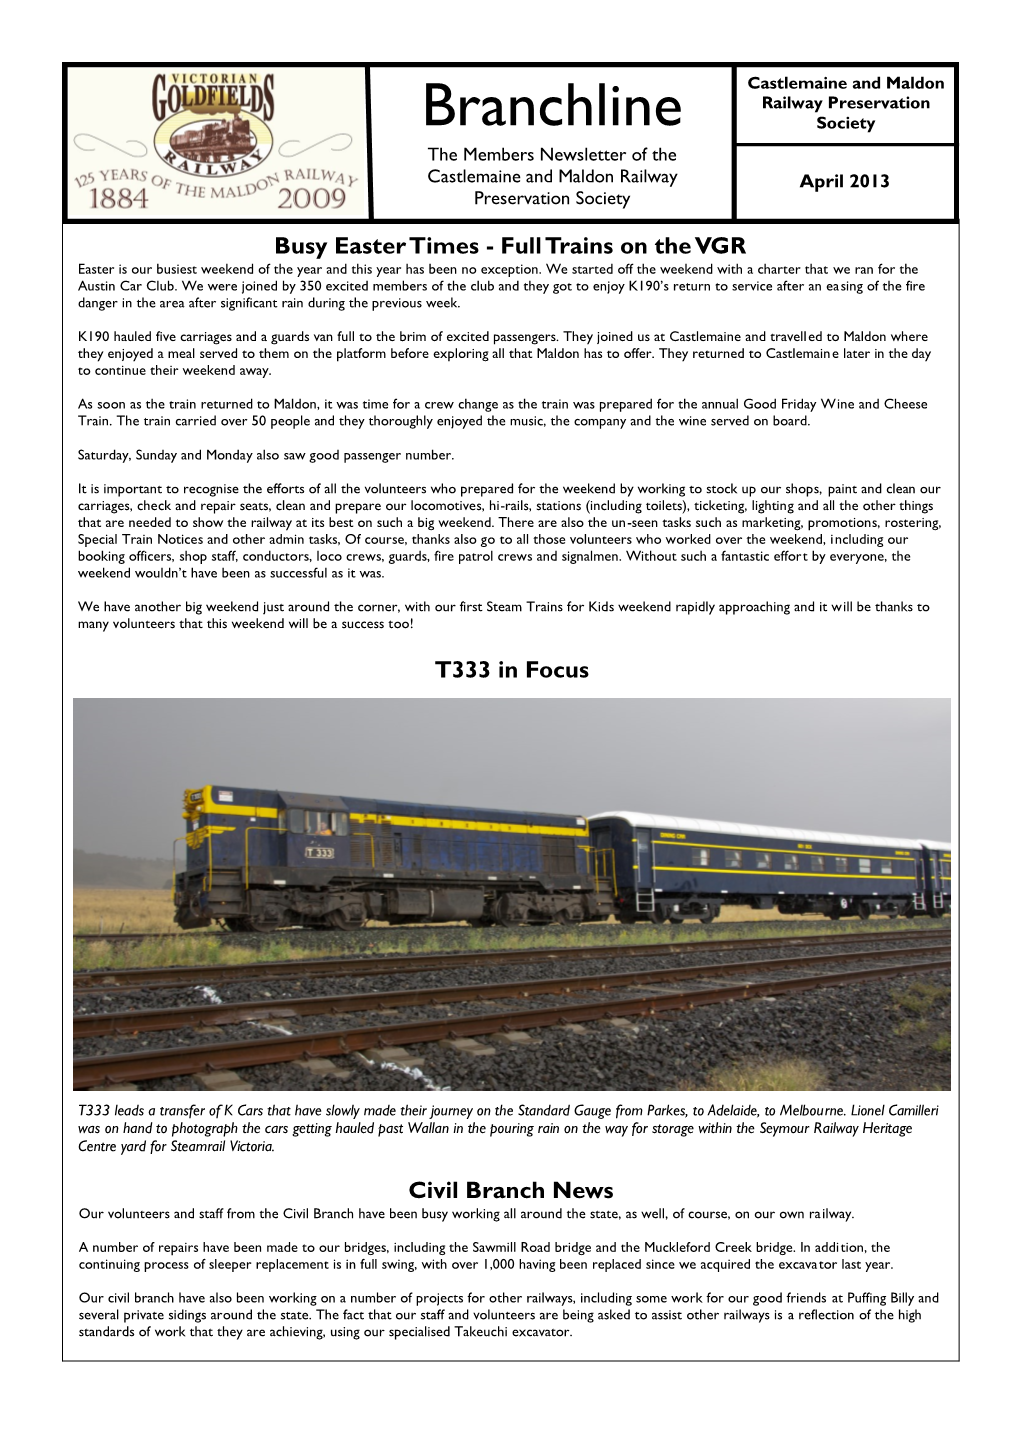 Branchline Society the Members Newsletter of the Castlemaine and Maldon Railway April 2013 Preservation Society